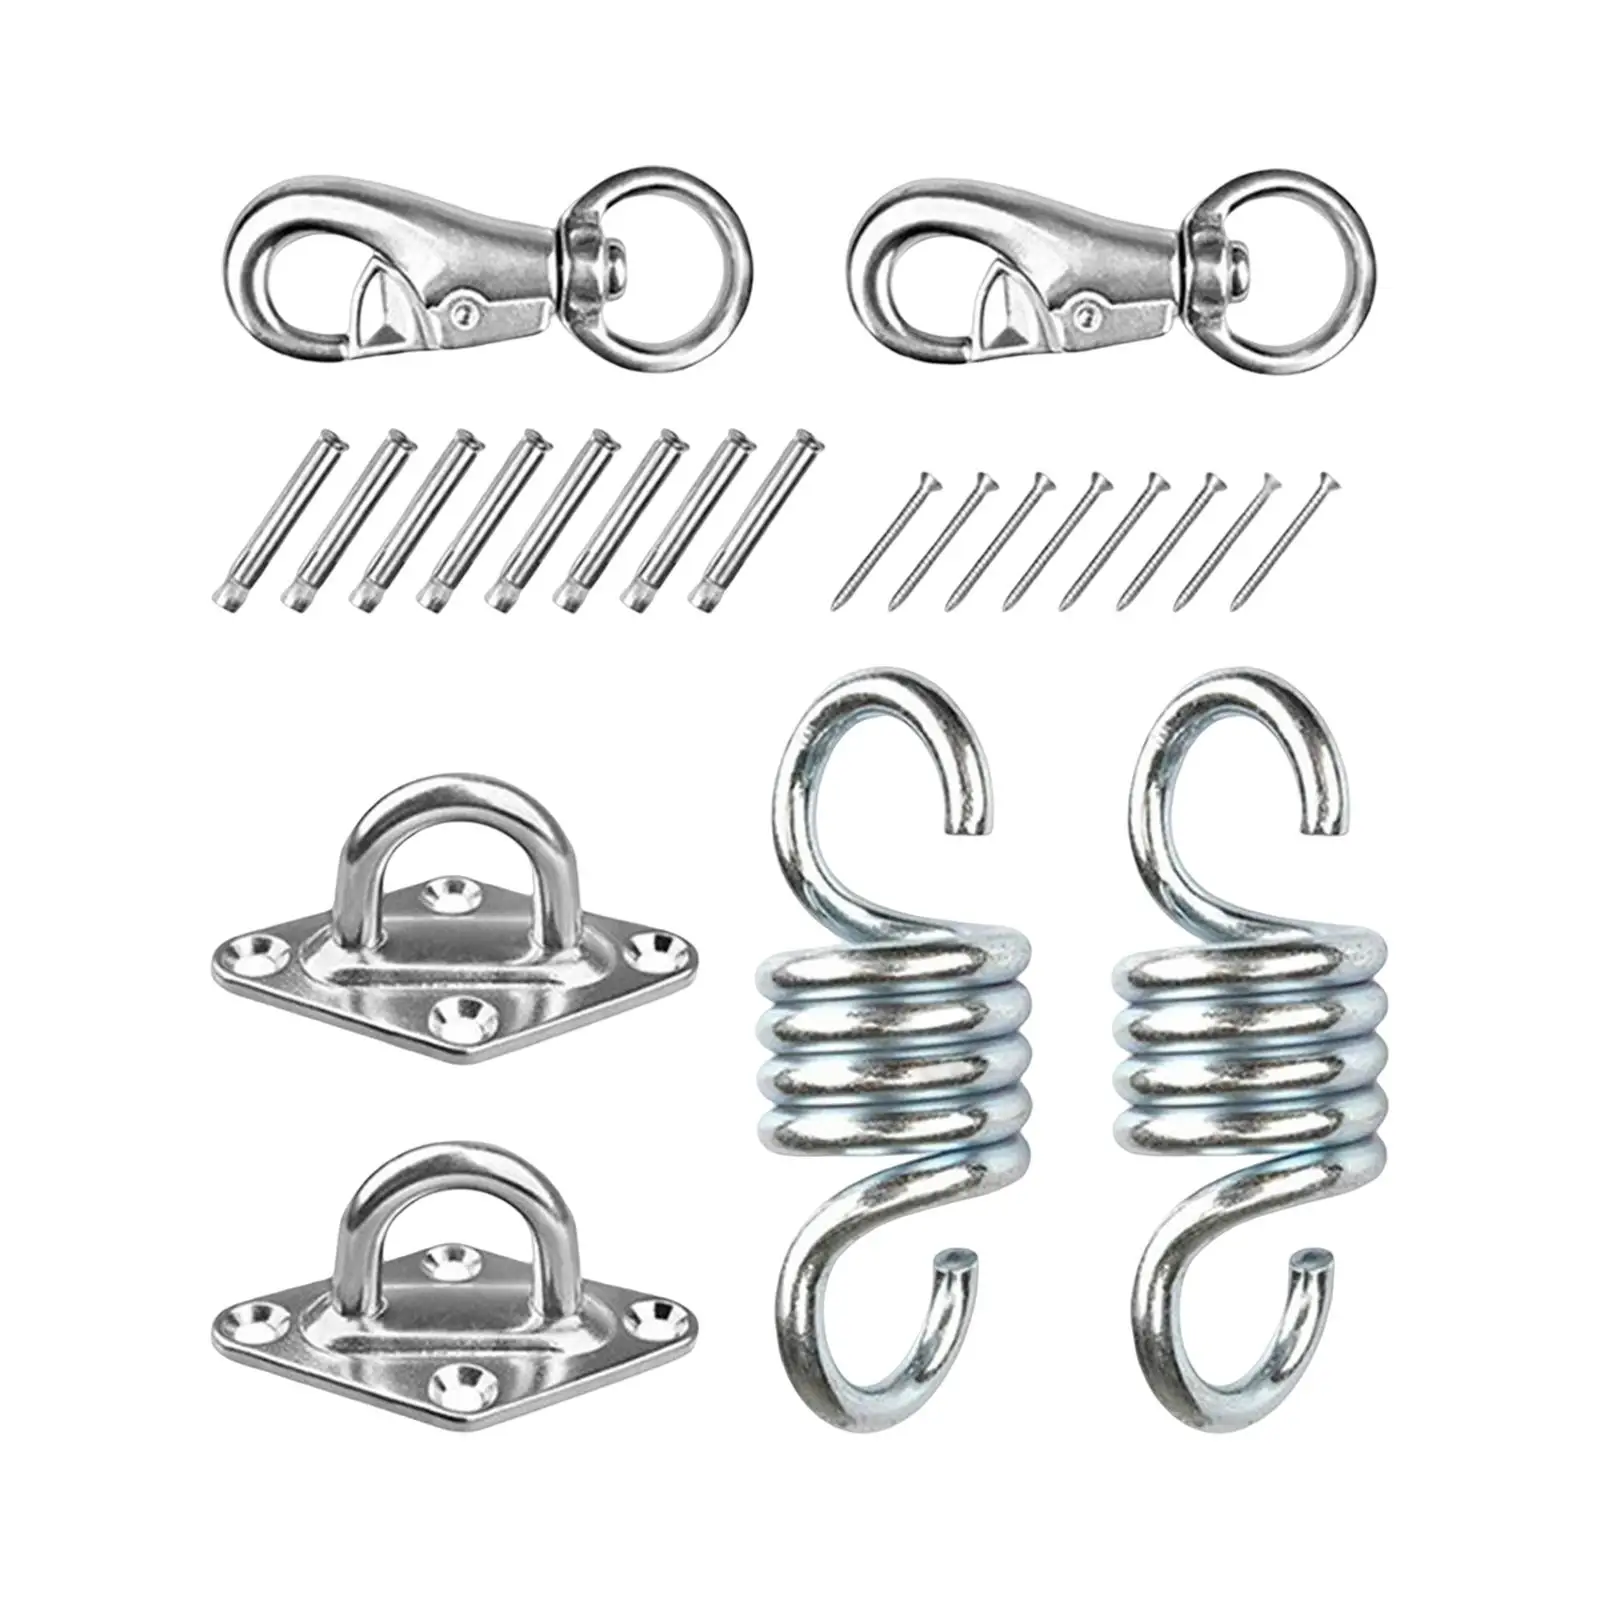 Hammock Chair Hanging Kit Hardware Hook with Screws and Anchors for Training Straps Hammocks